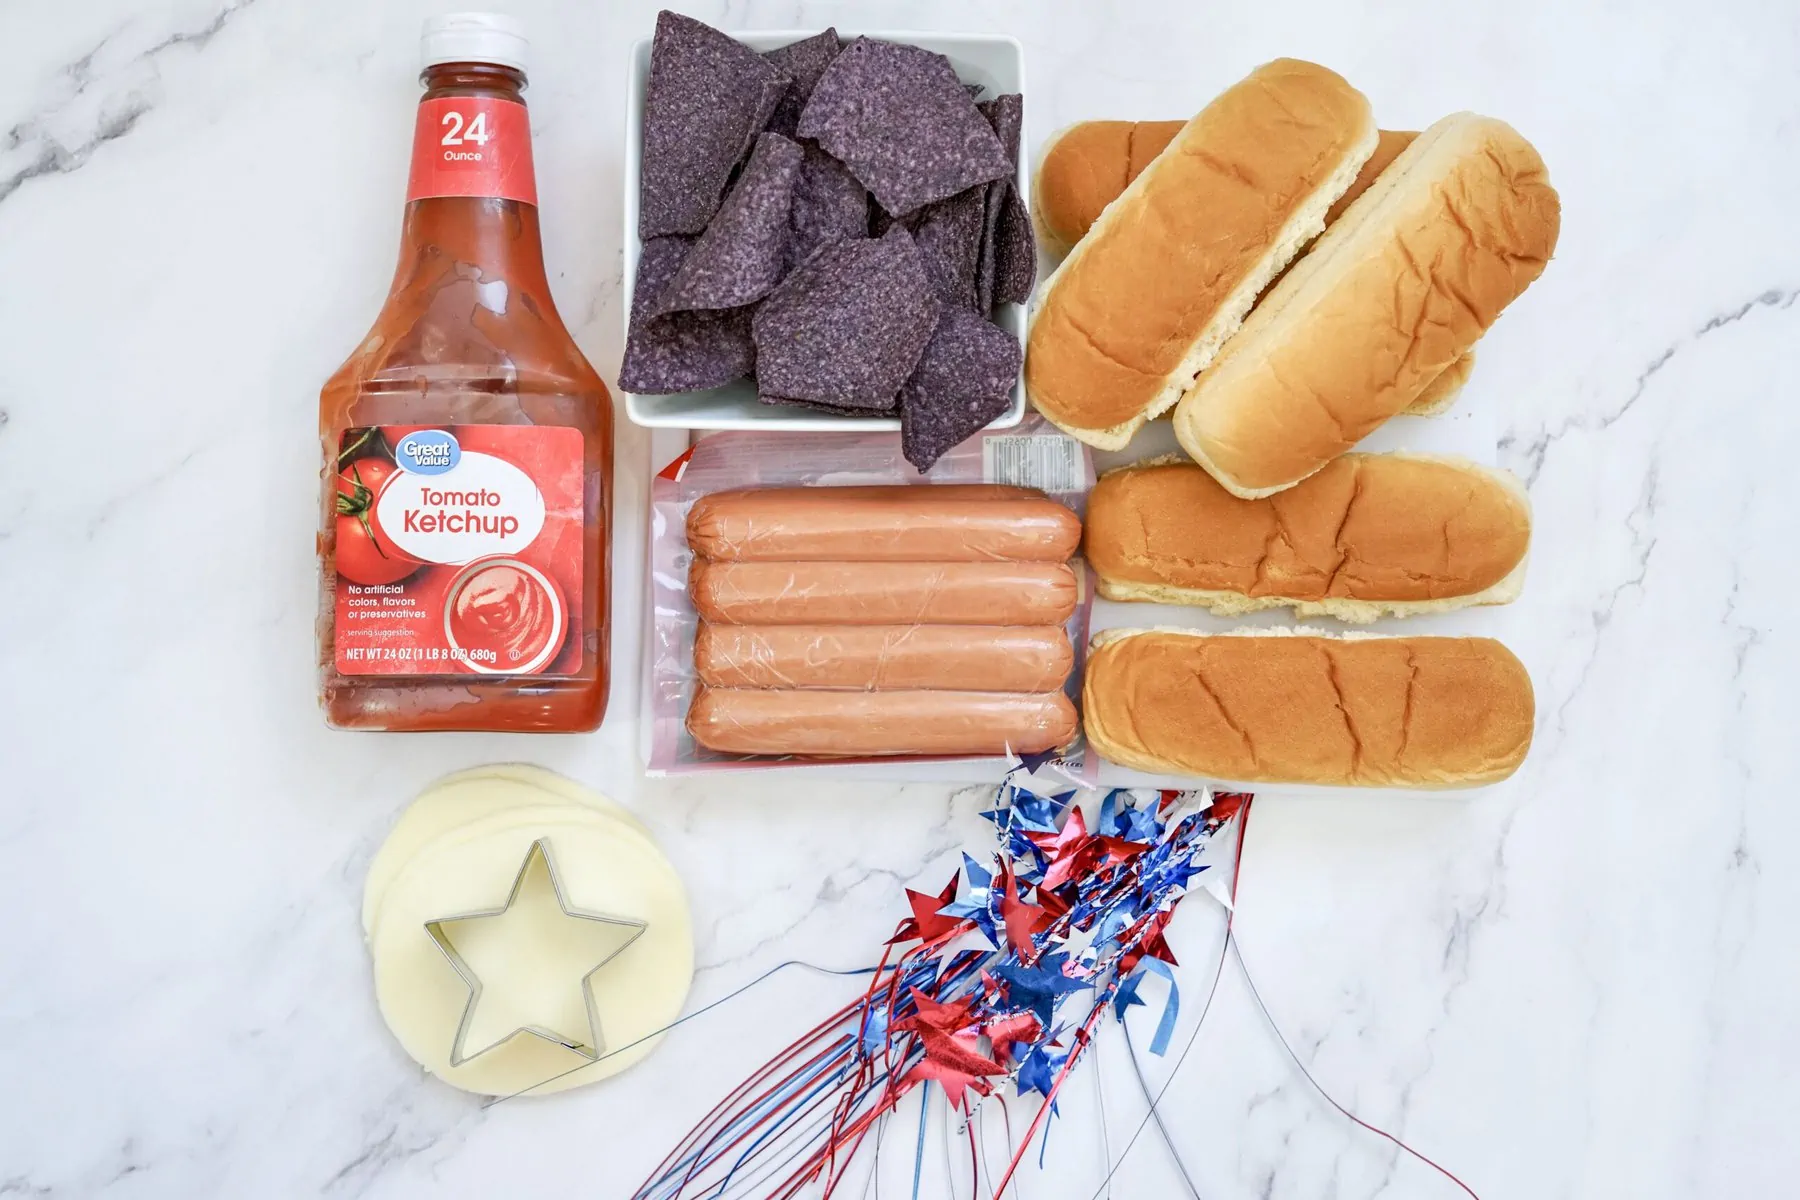 Ingredients for a hot dog bar